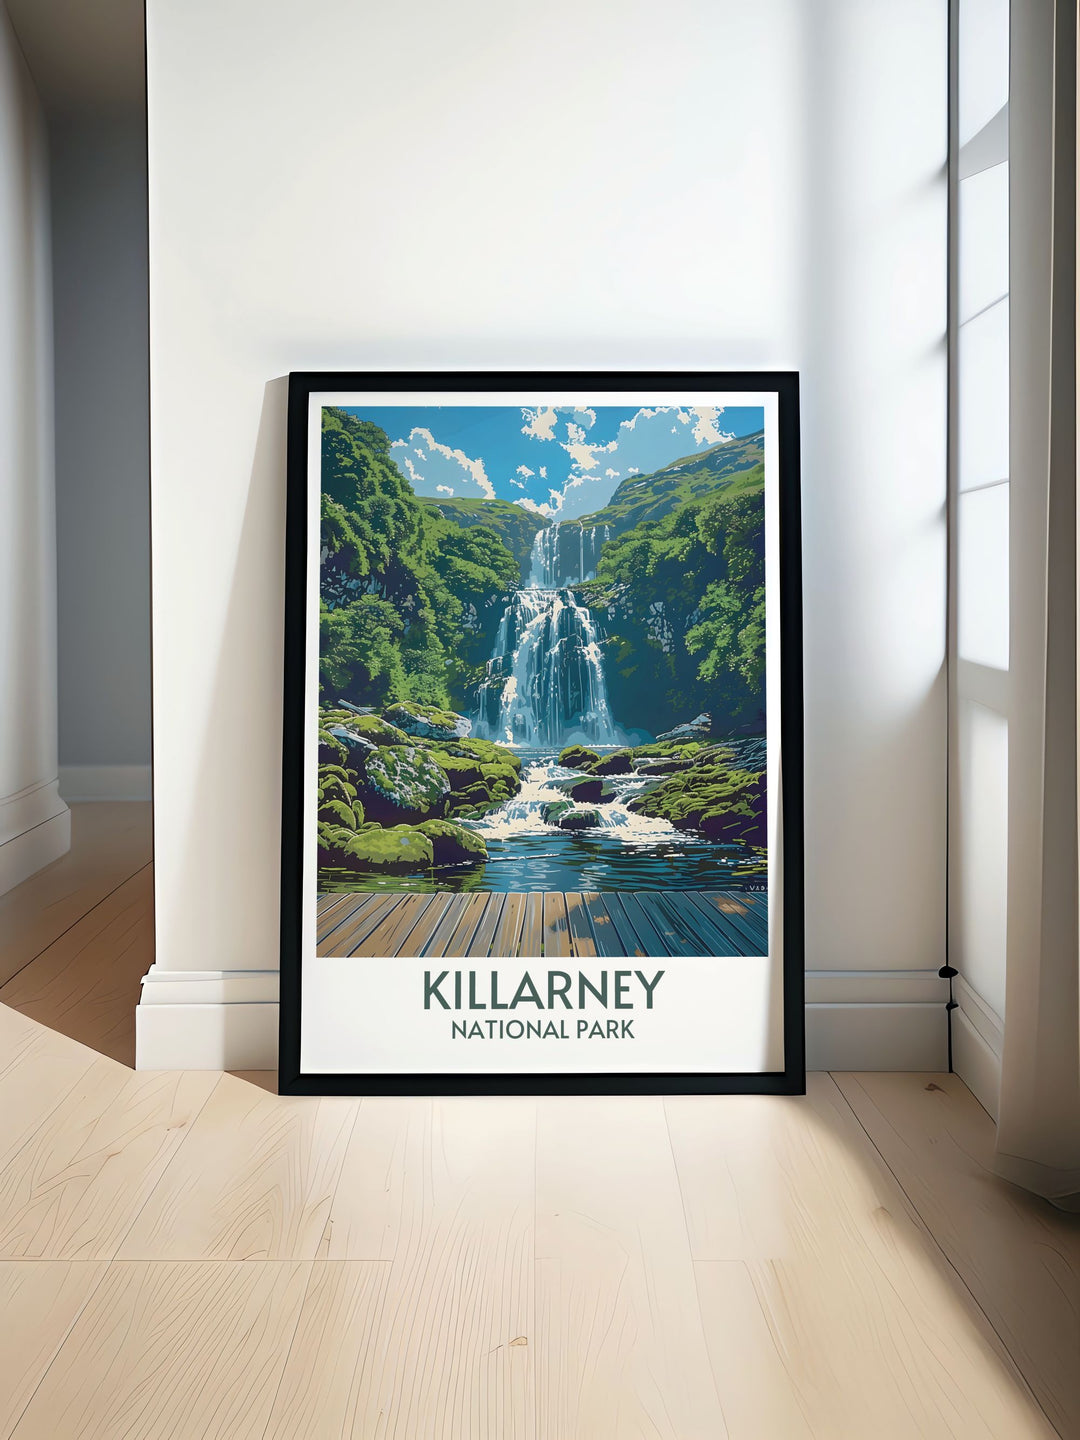 Modern wall decor featuring the lush scenery of Killarney National Park, perfect for nature lovers.